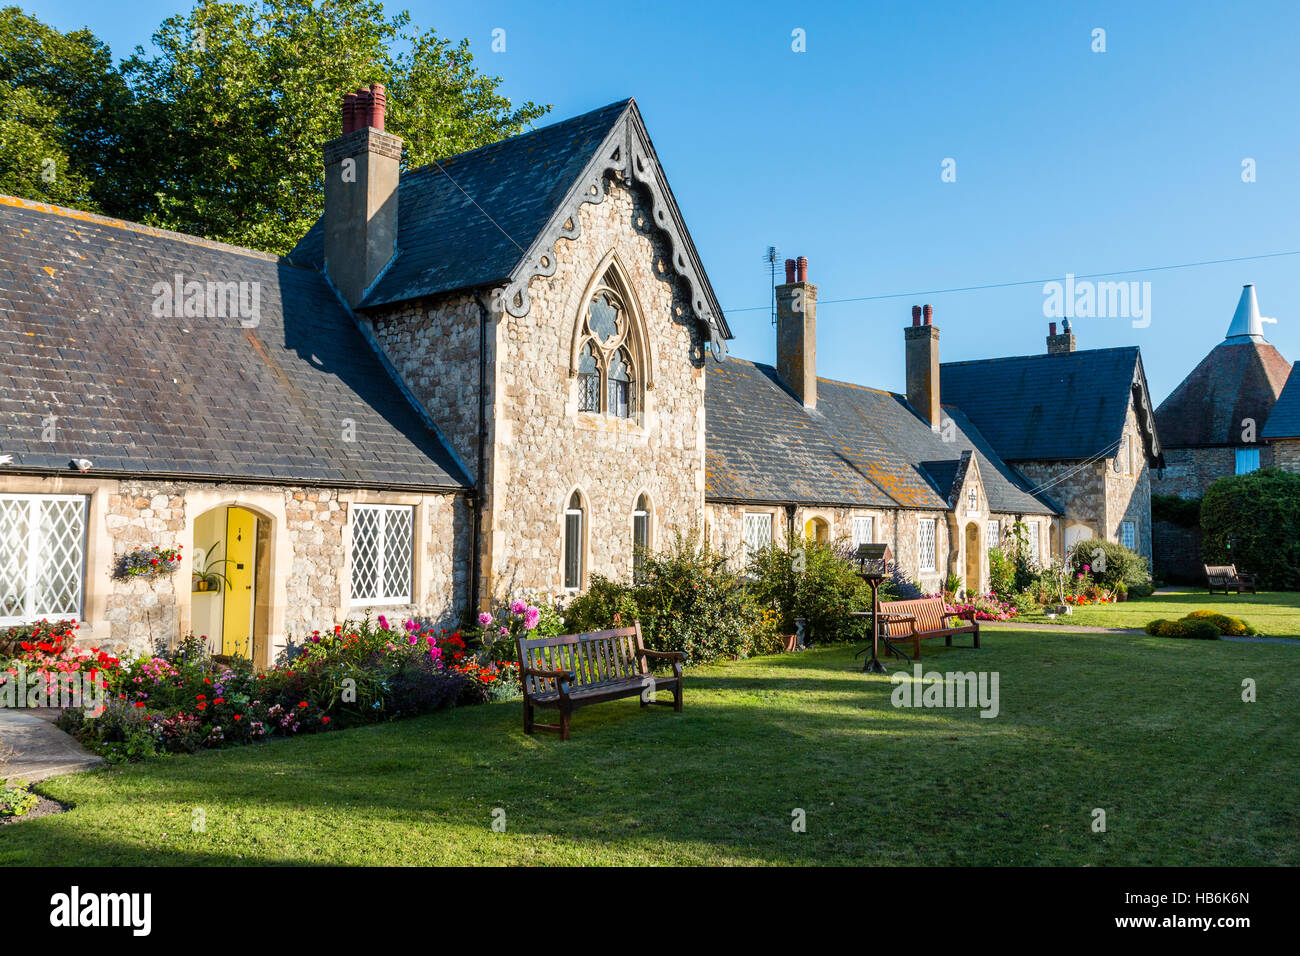 England, Sandwich. St Thomas's hospital, now almshouses. View along 1850's building with green lawn in foreground. Bright sunshine, clear blue sky. Stock Photo